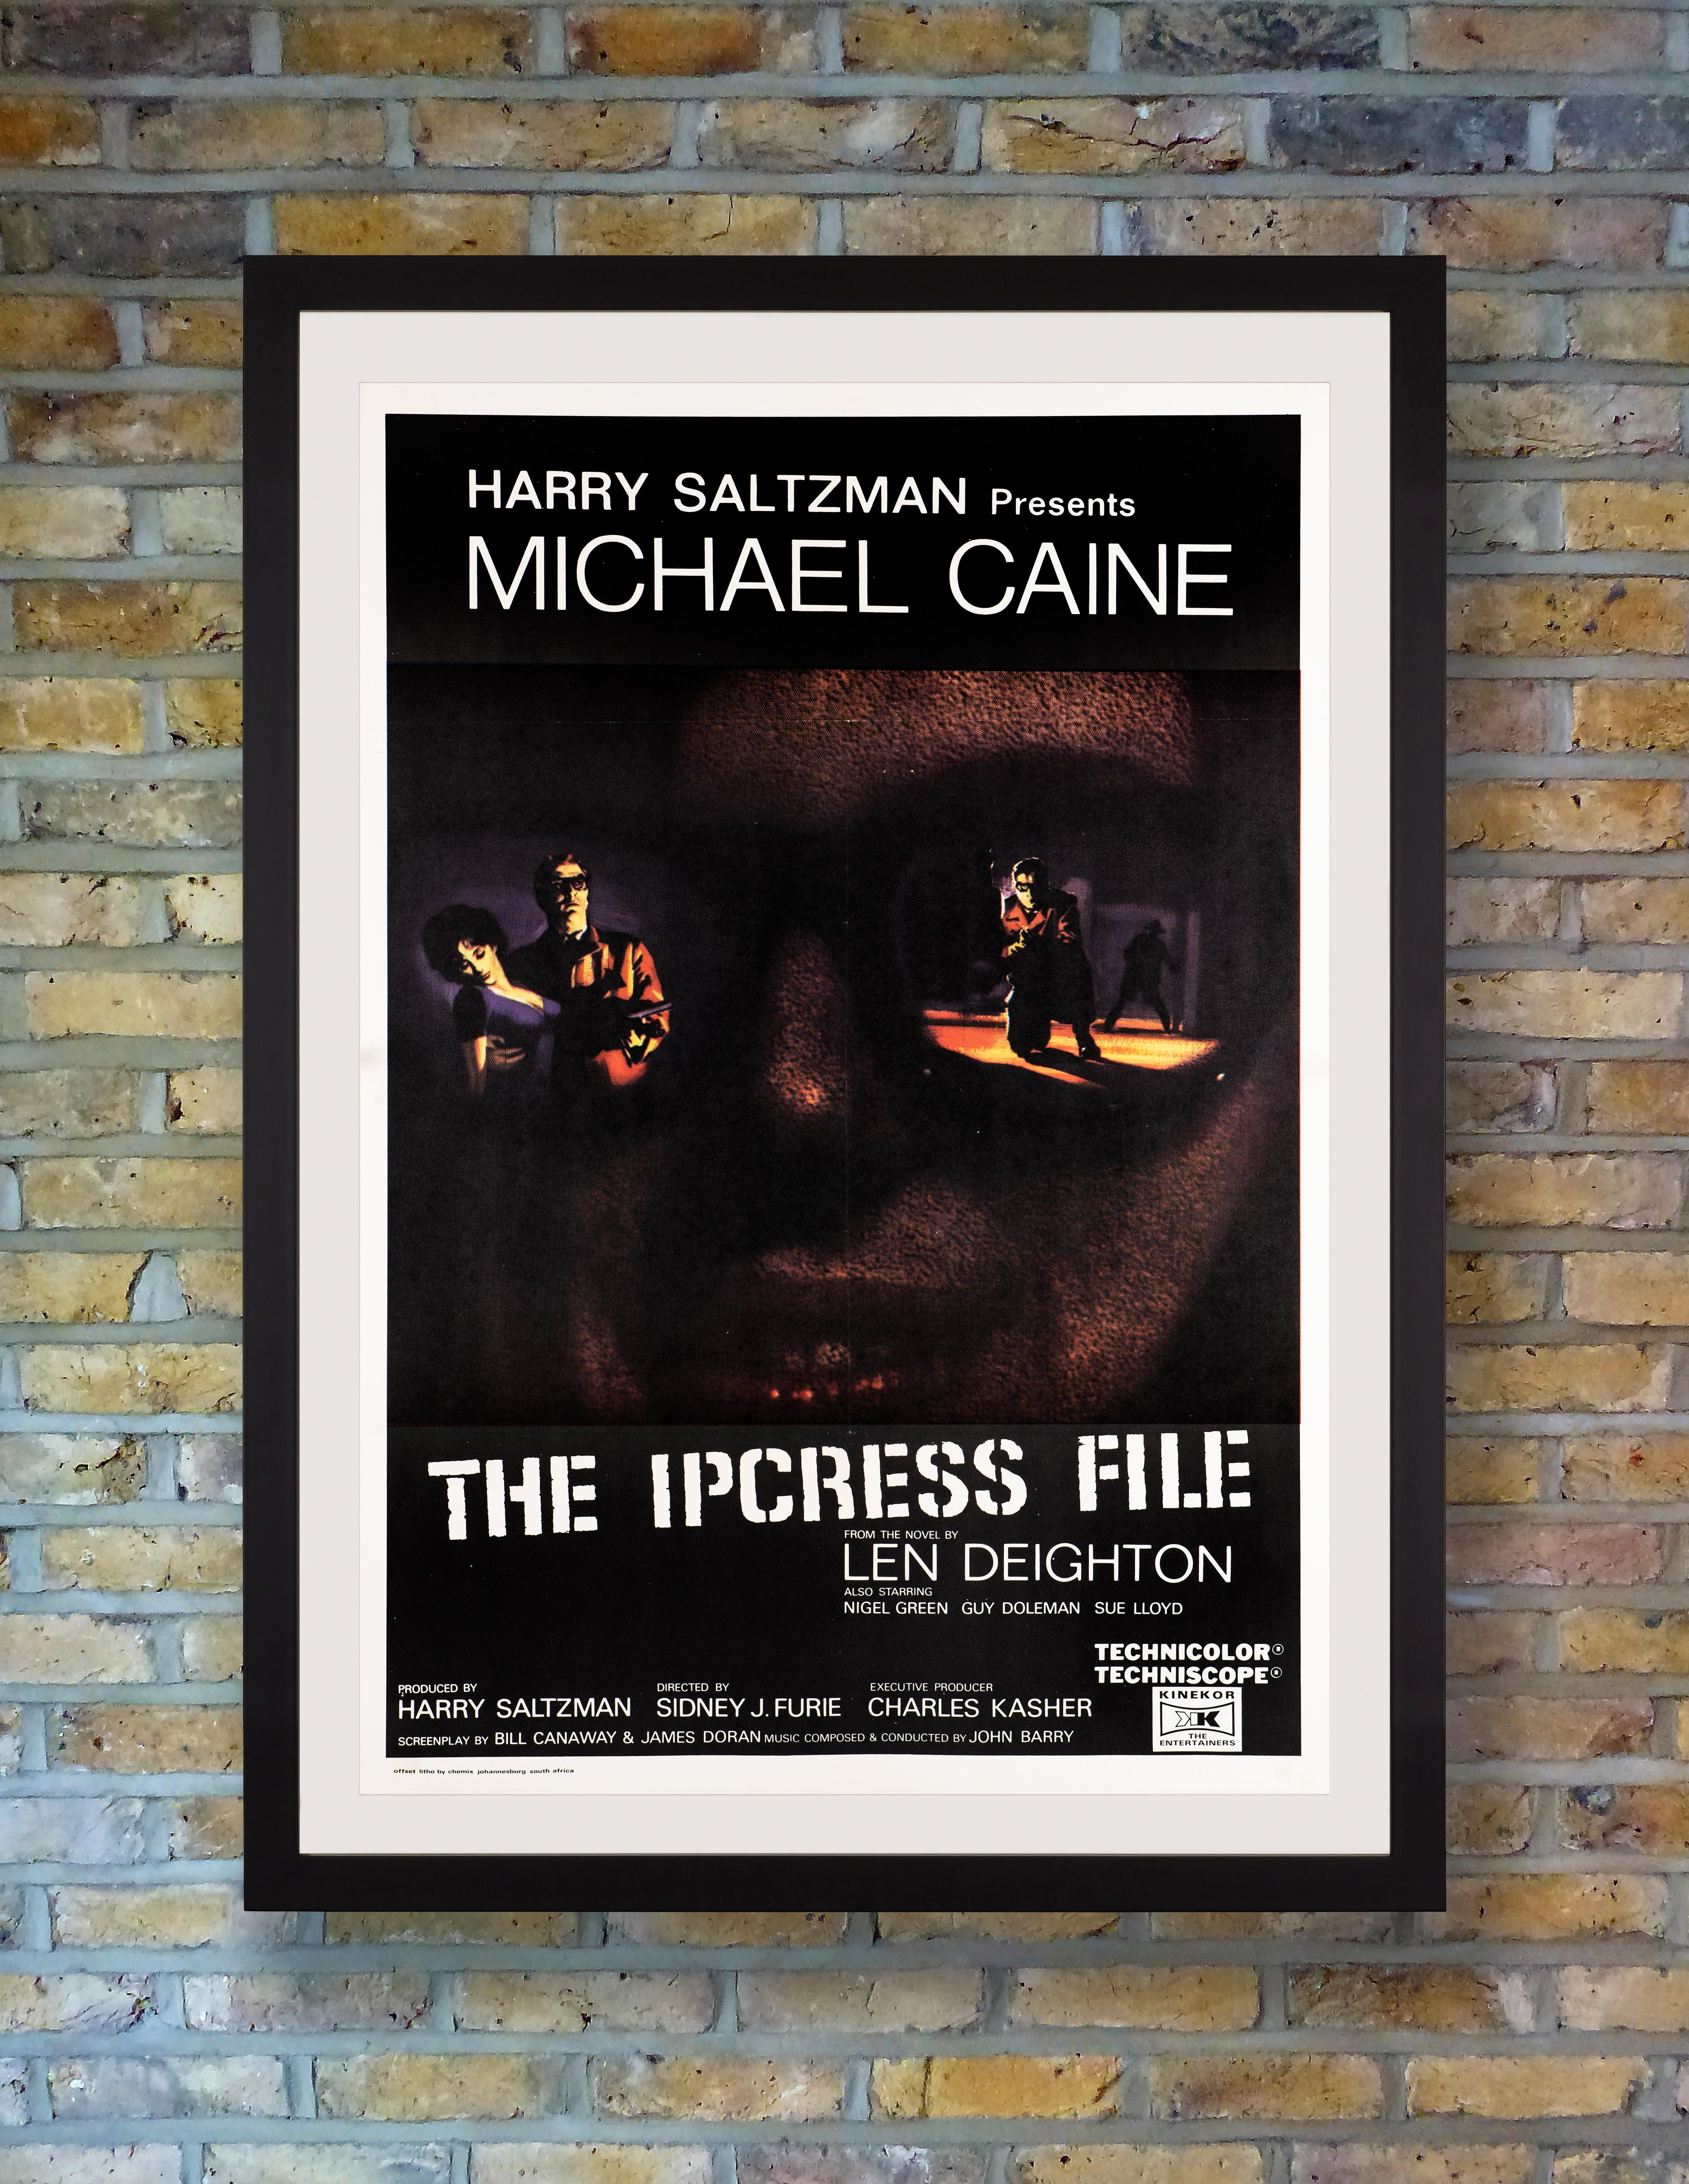 An exceedingly rare poster for the South African release of the 1965 British espionage thriller 'The Ipcress File' starring Michael Caine as agent Harry Palmer. The South African one-sheet features a slightly darker version of the atmospheric Angelo